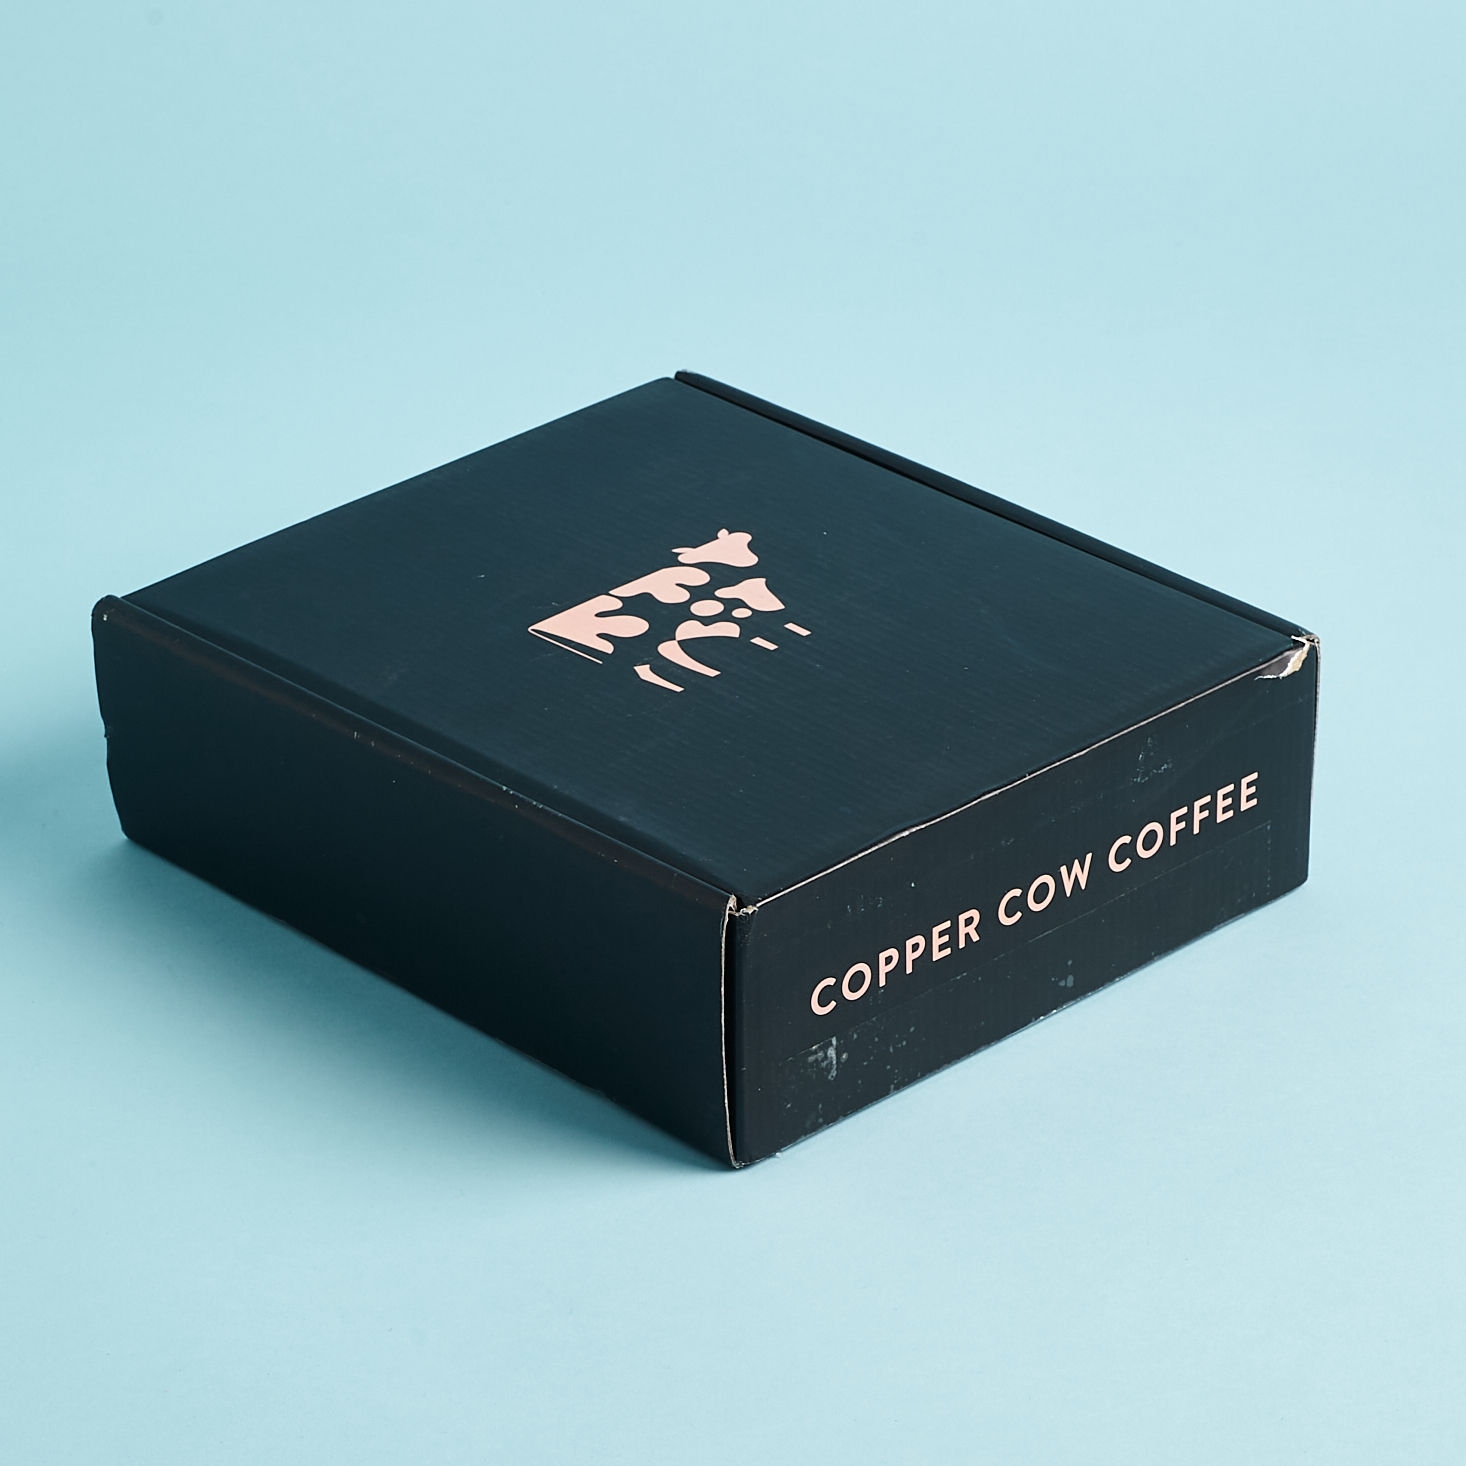 How to Use a Phin – Copper Cow Coffee